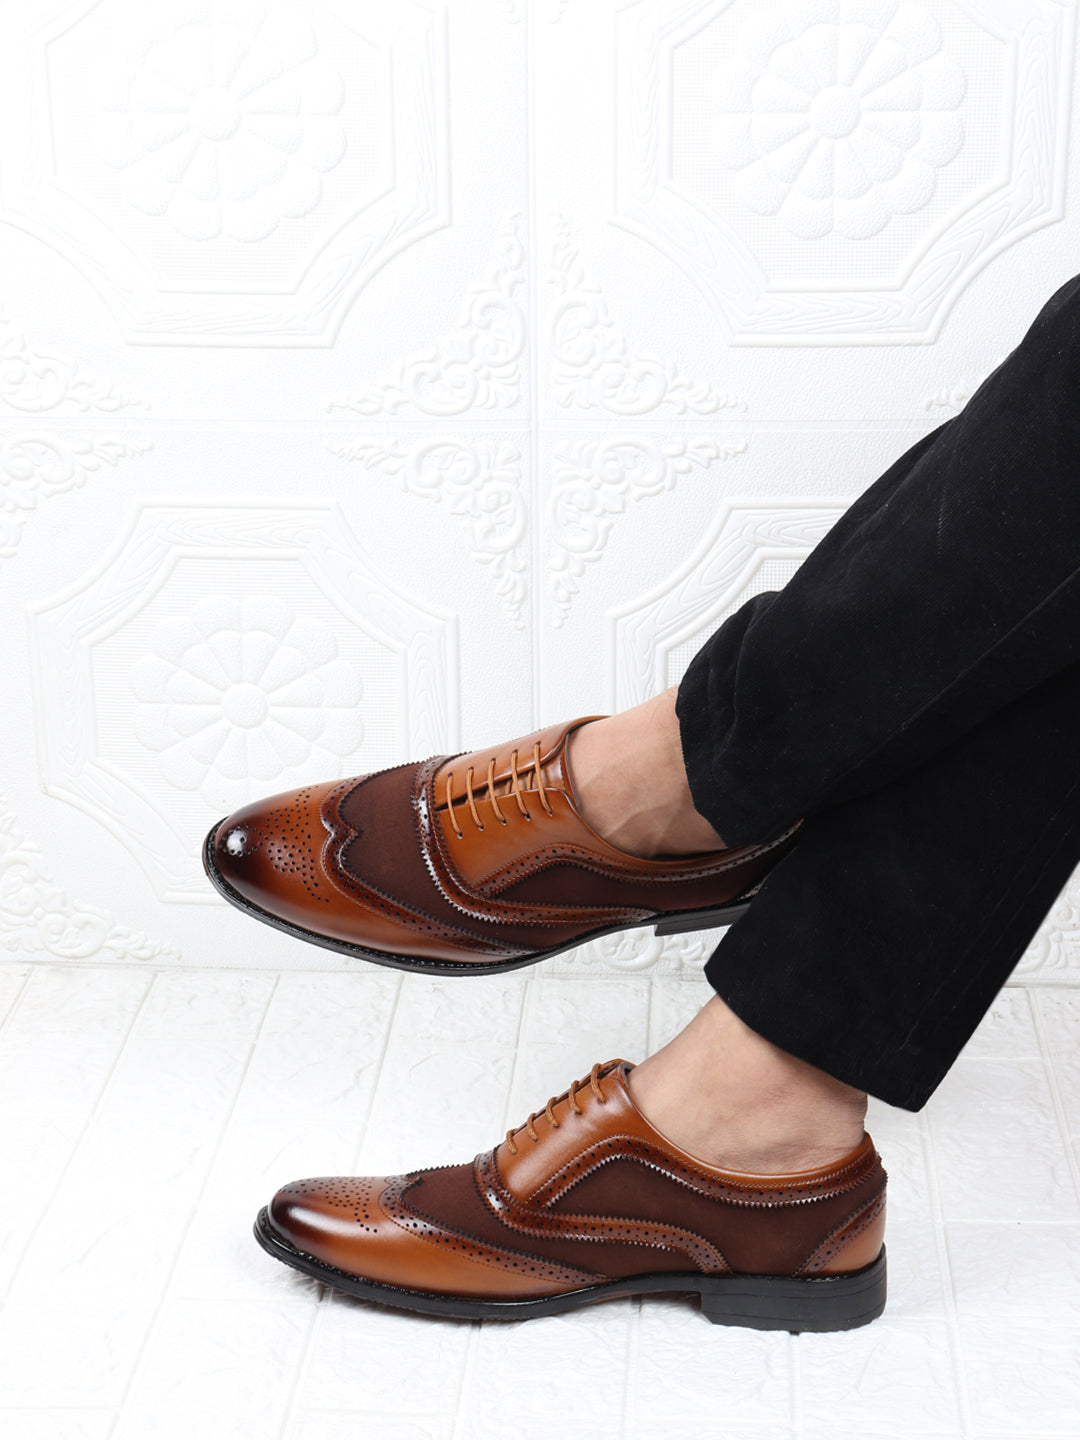 Office Shoes: Can We Actually Wear Slippers (Slides) To Work? - The Fashion  Tag Blog